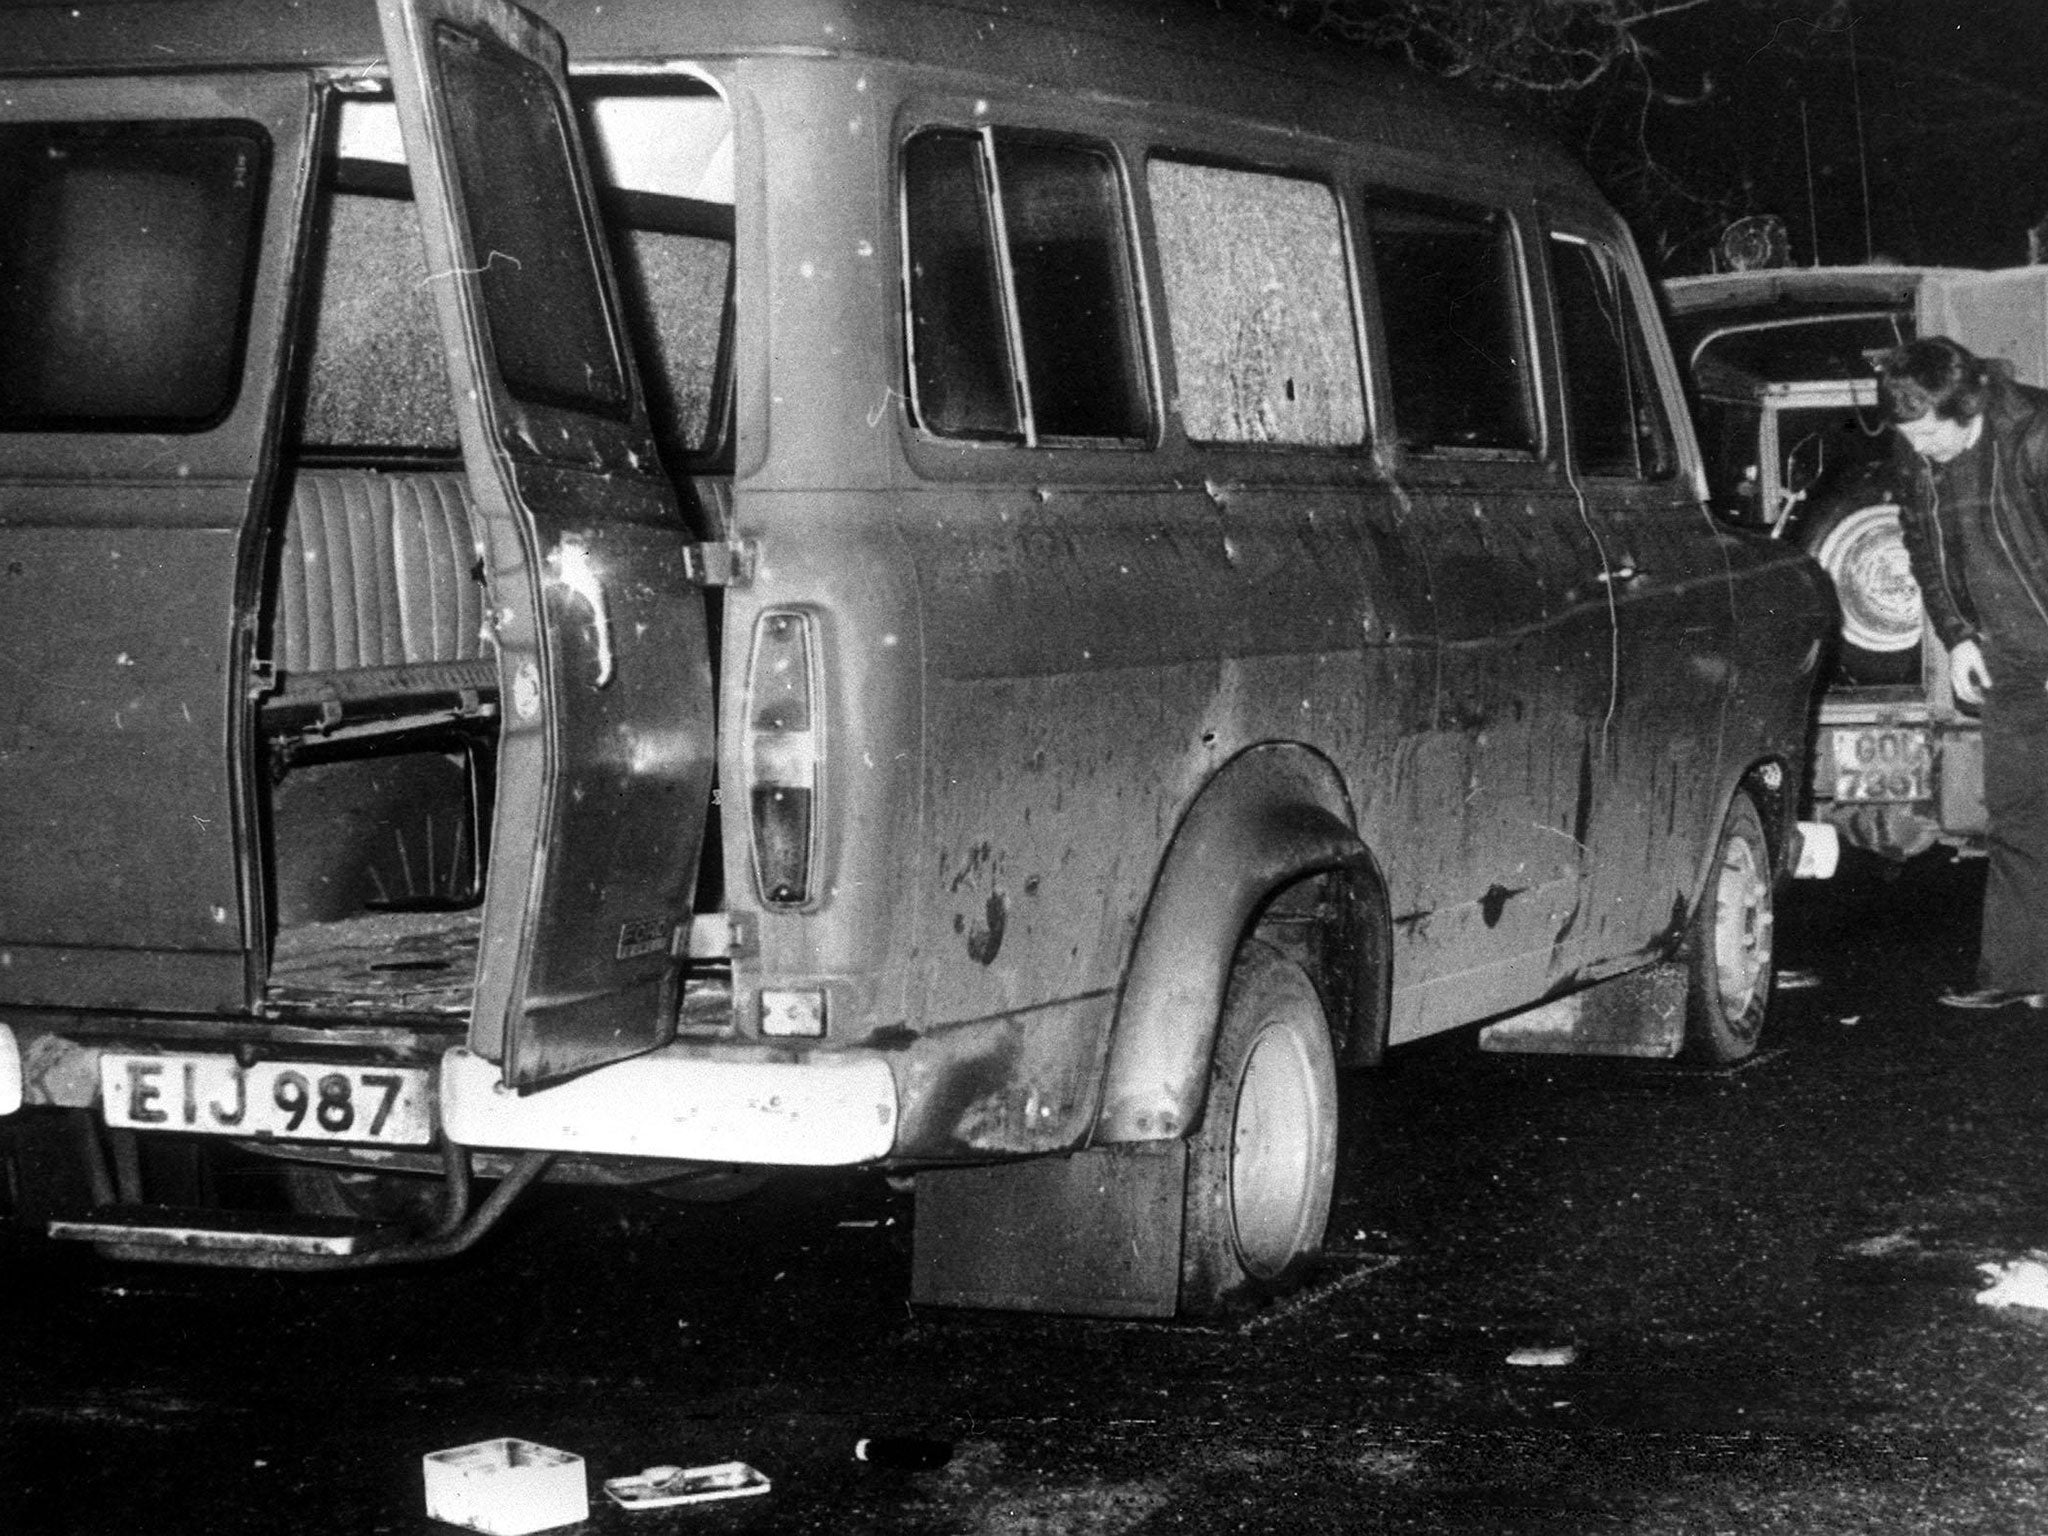 The bullet-riddled minibus found near Whitecross in South Armagh where ten Protestant workmen were shot dead